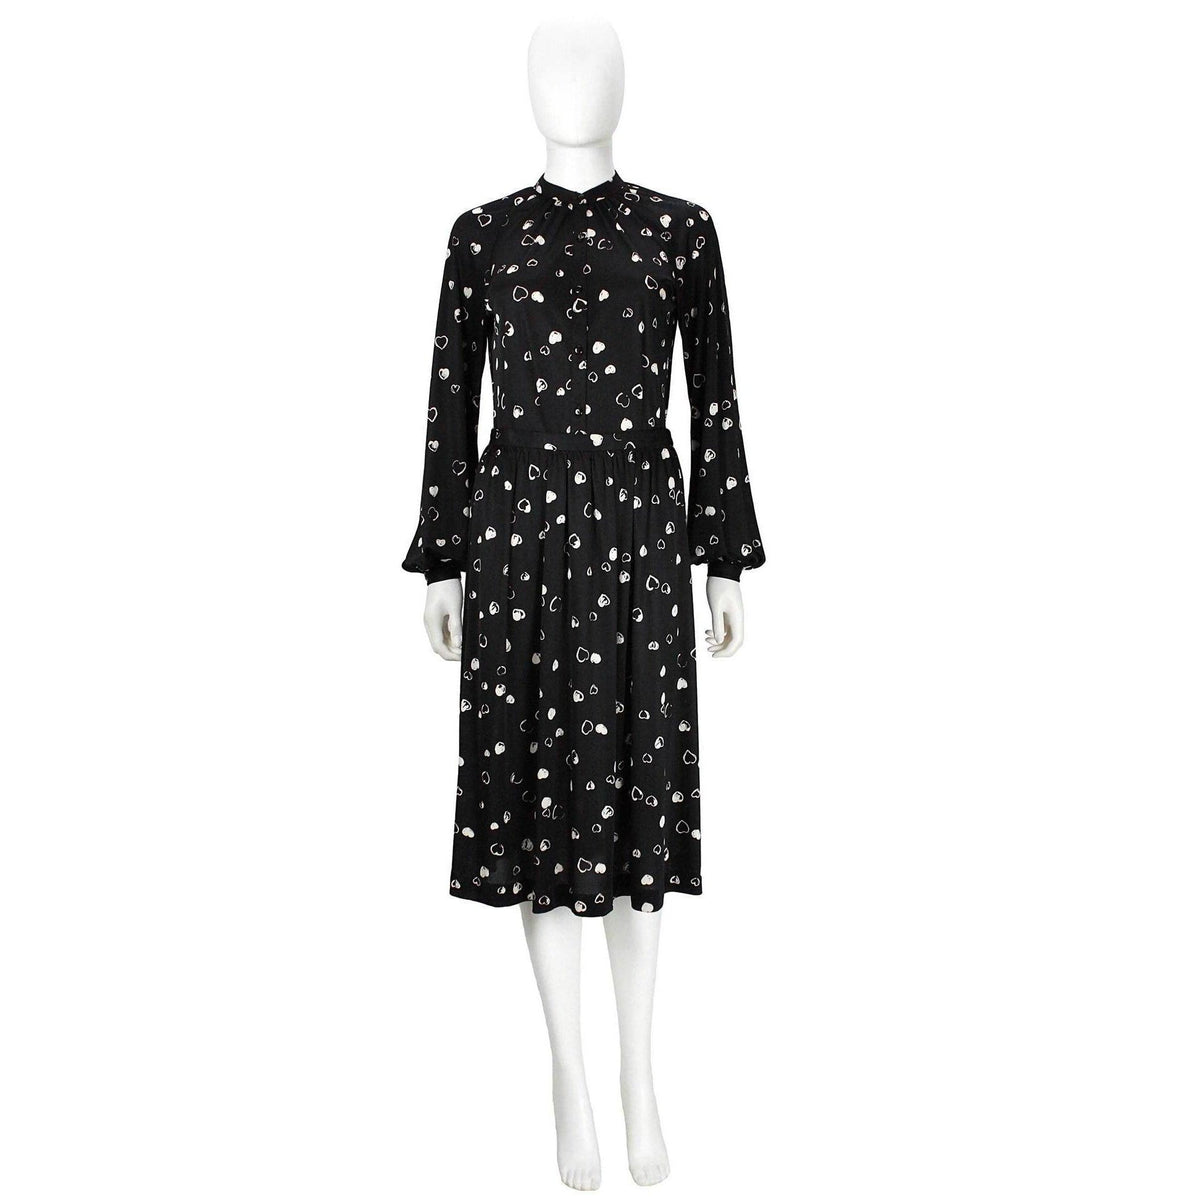 Pre-Owned HALSTON 1970's Black and White Hearts Blouse and Skirt Set | US 8 - theREMODA